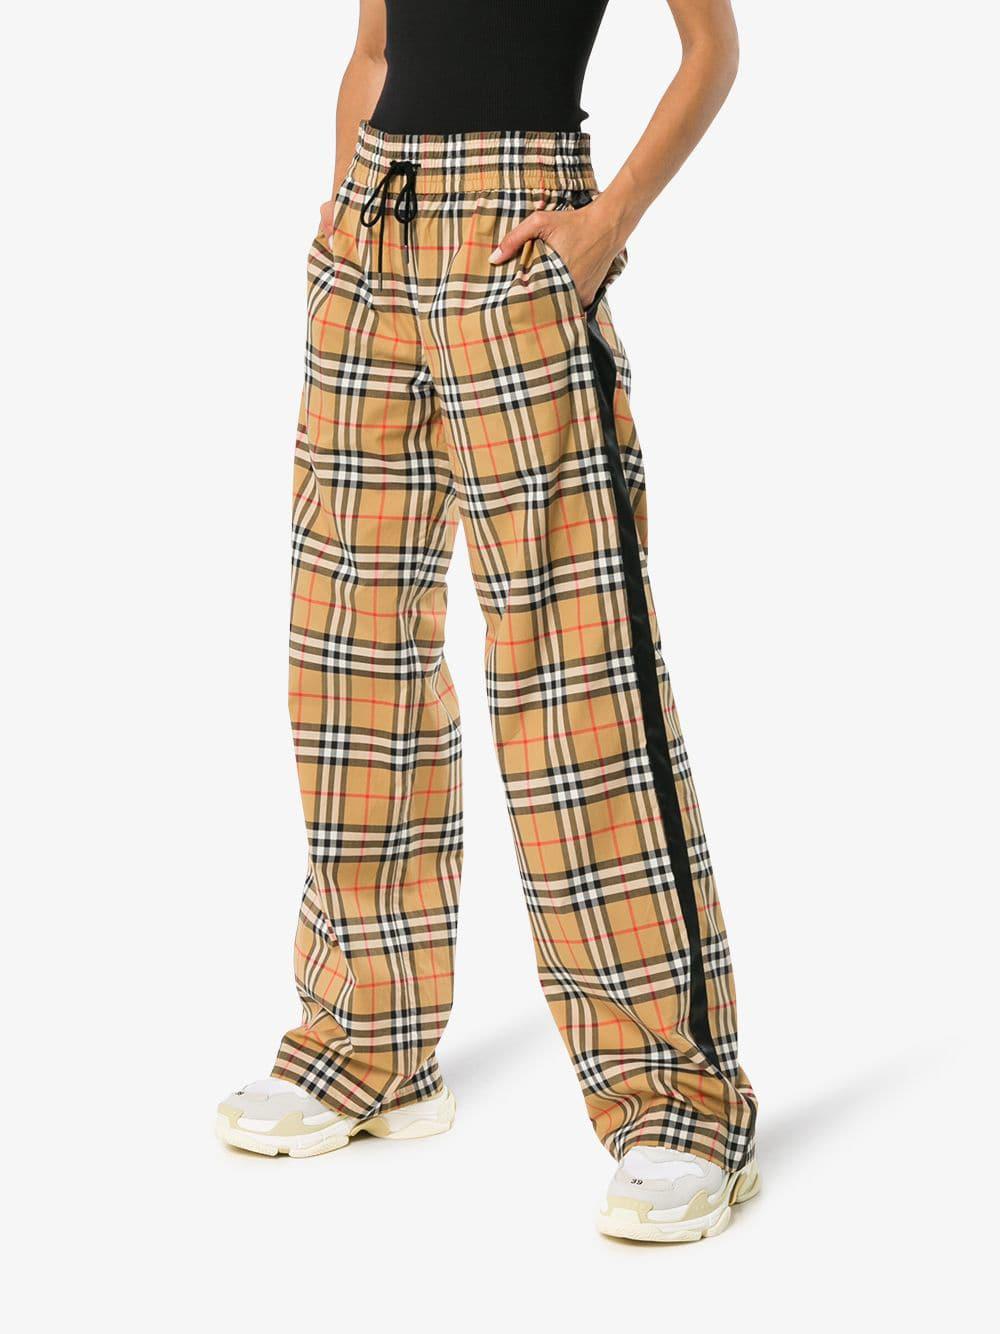 burberry trousers womens fake